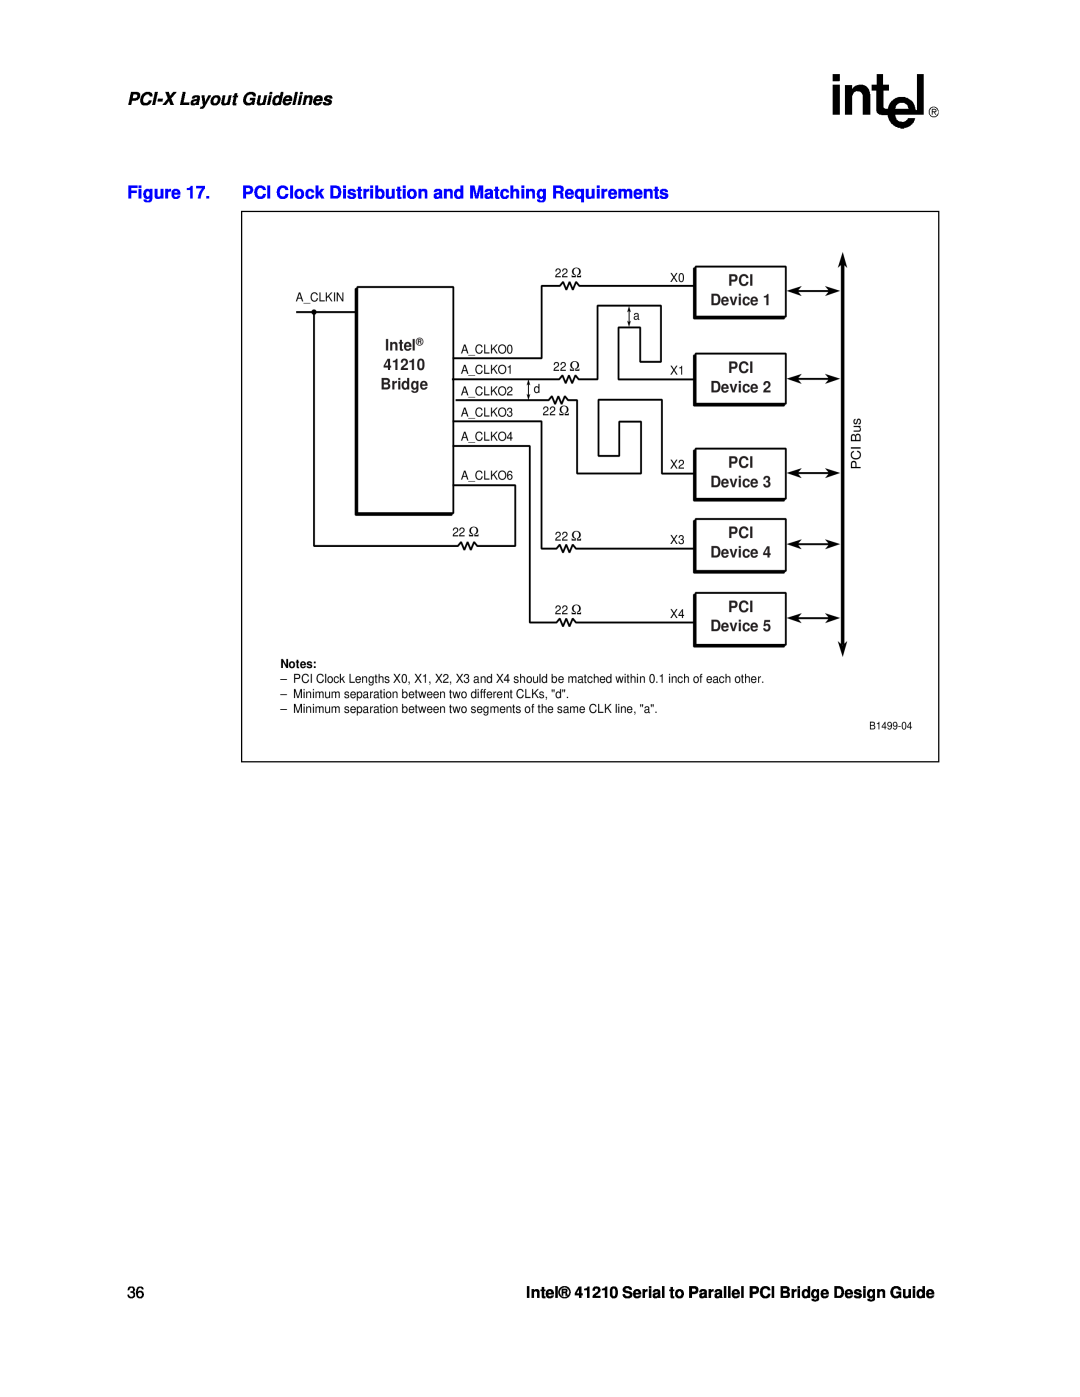 Intel manual PCI Clock Distribution and Matching Requirements, PCI-X Layout Guidelines, Intel 41210 Bridge, PCI Bus 